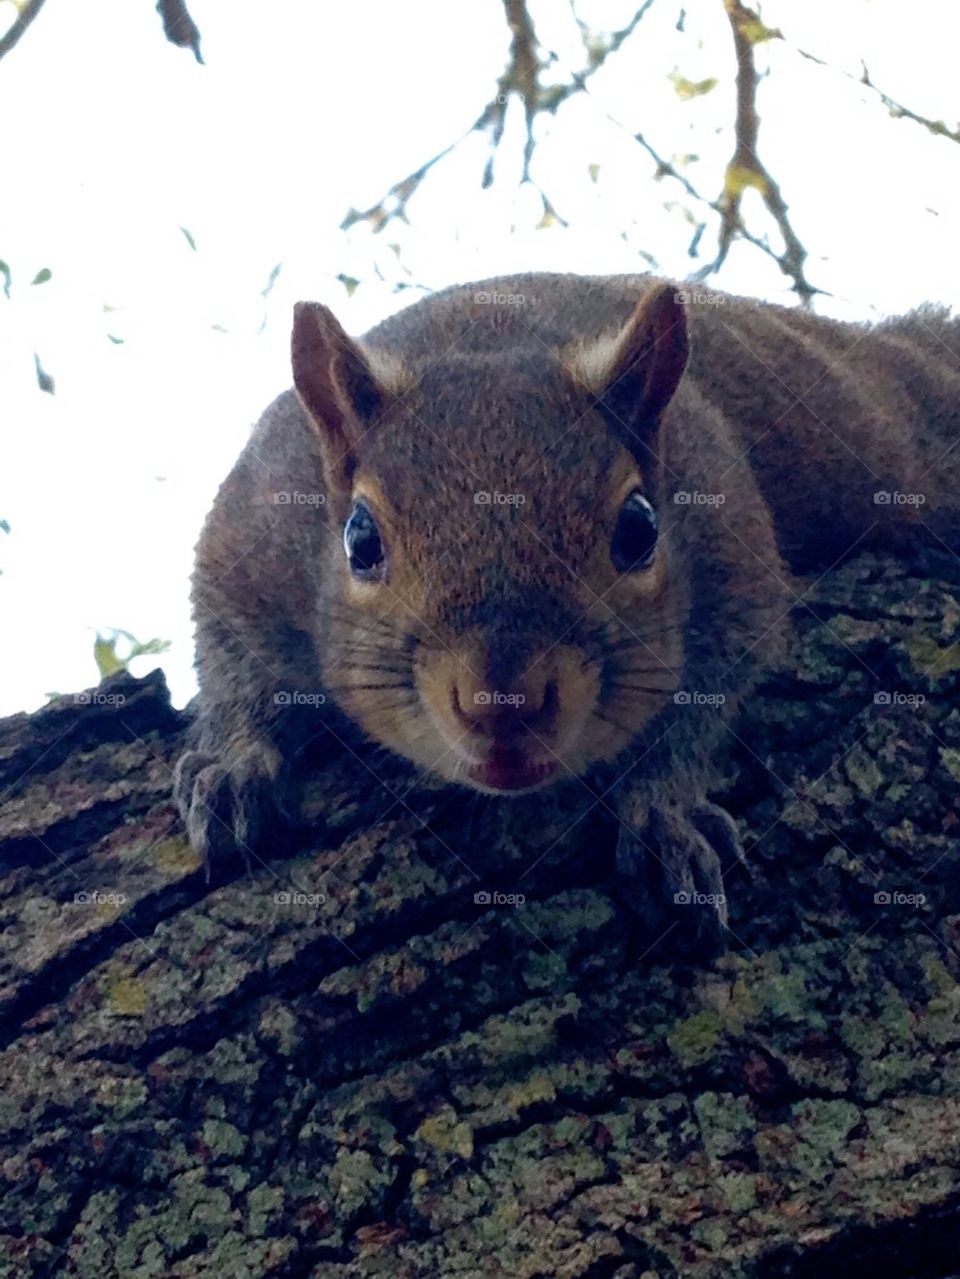 Here's looking at you. Squirrel in a tree. 